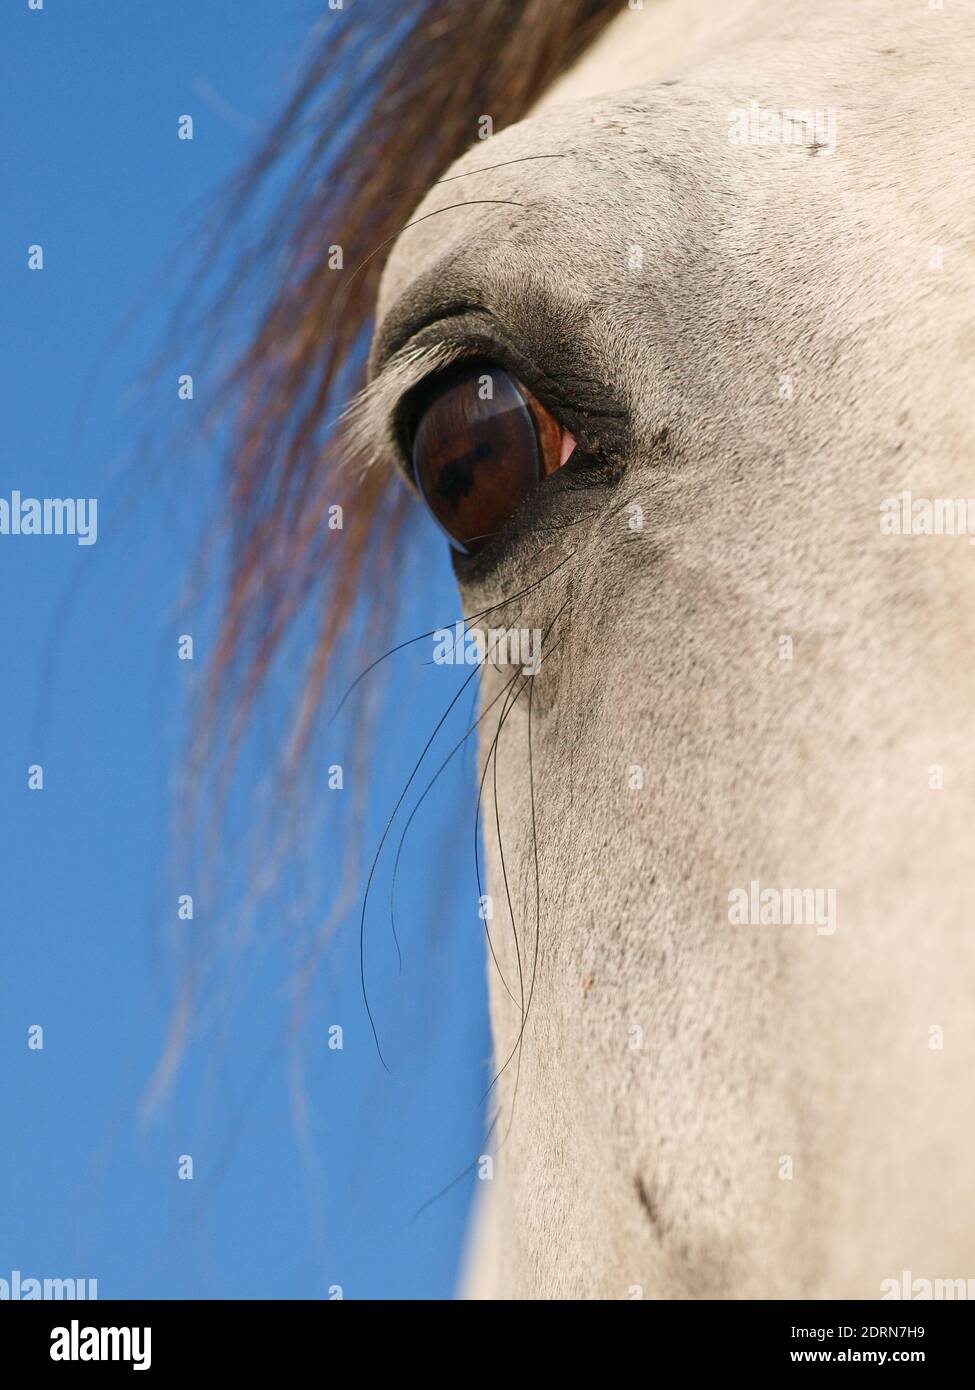 A close up of the eye and side of the face of a grey horse. Stock Photo